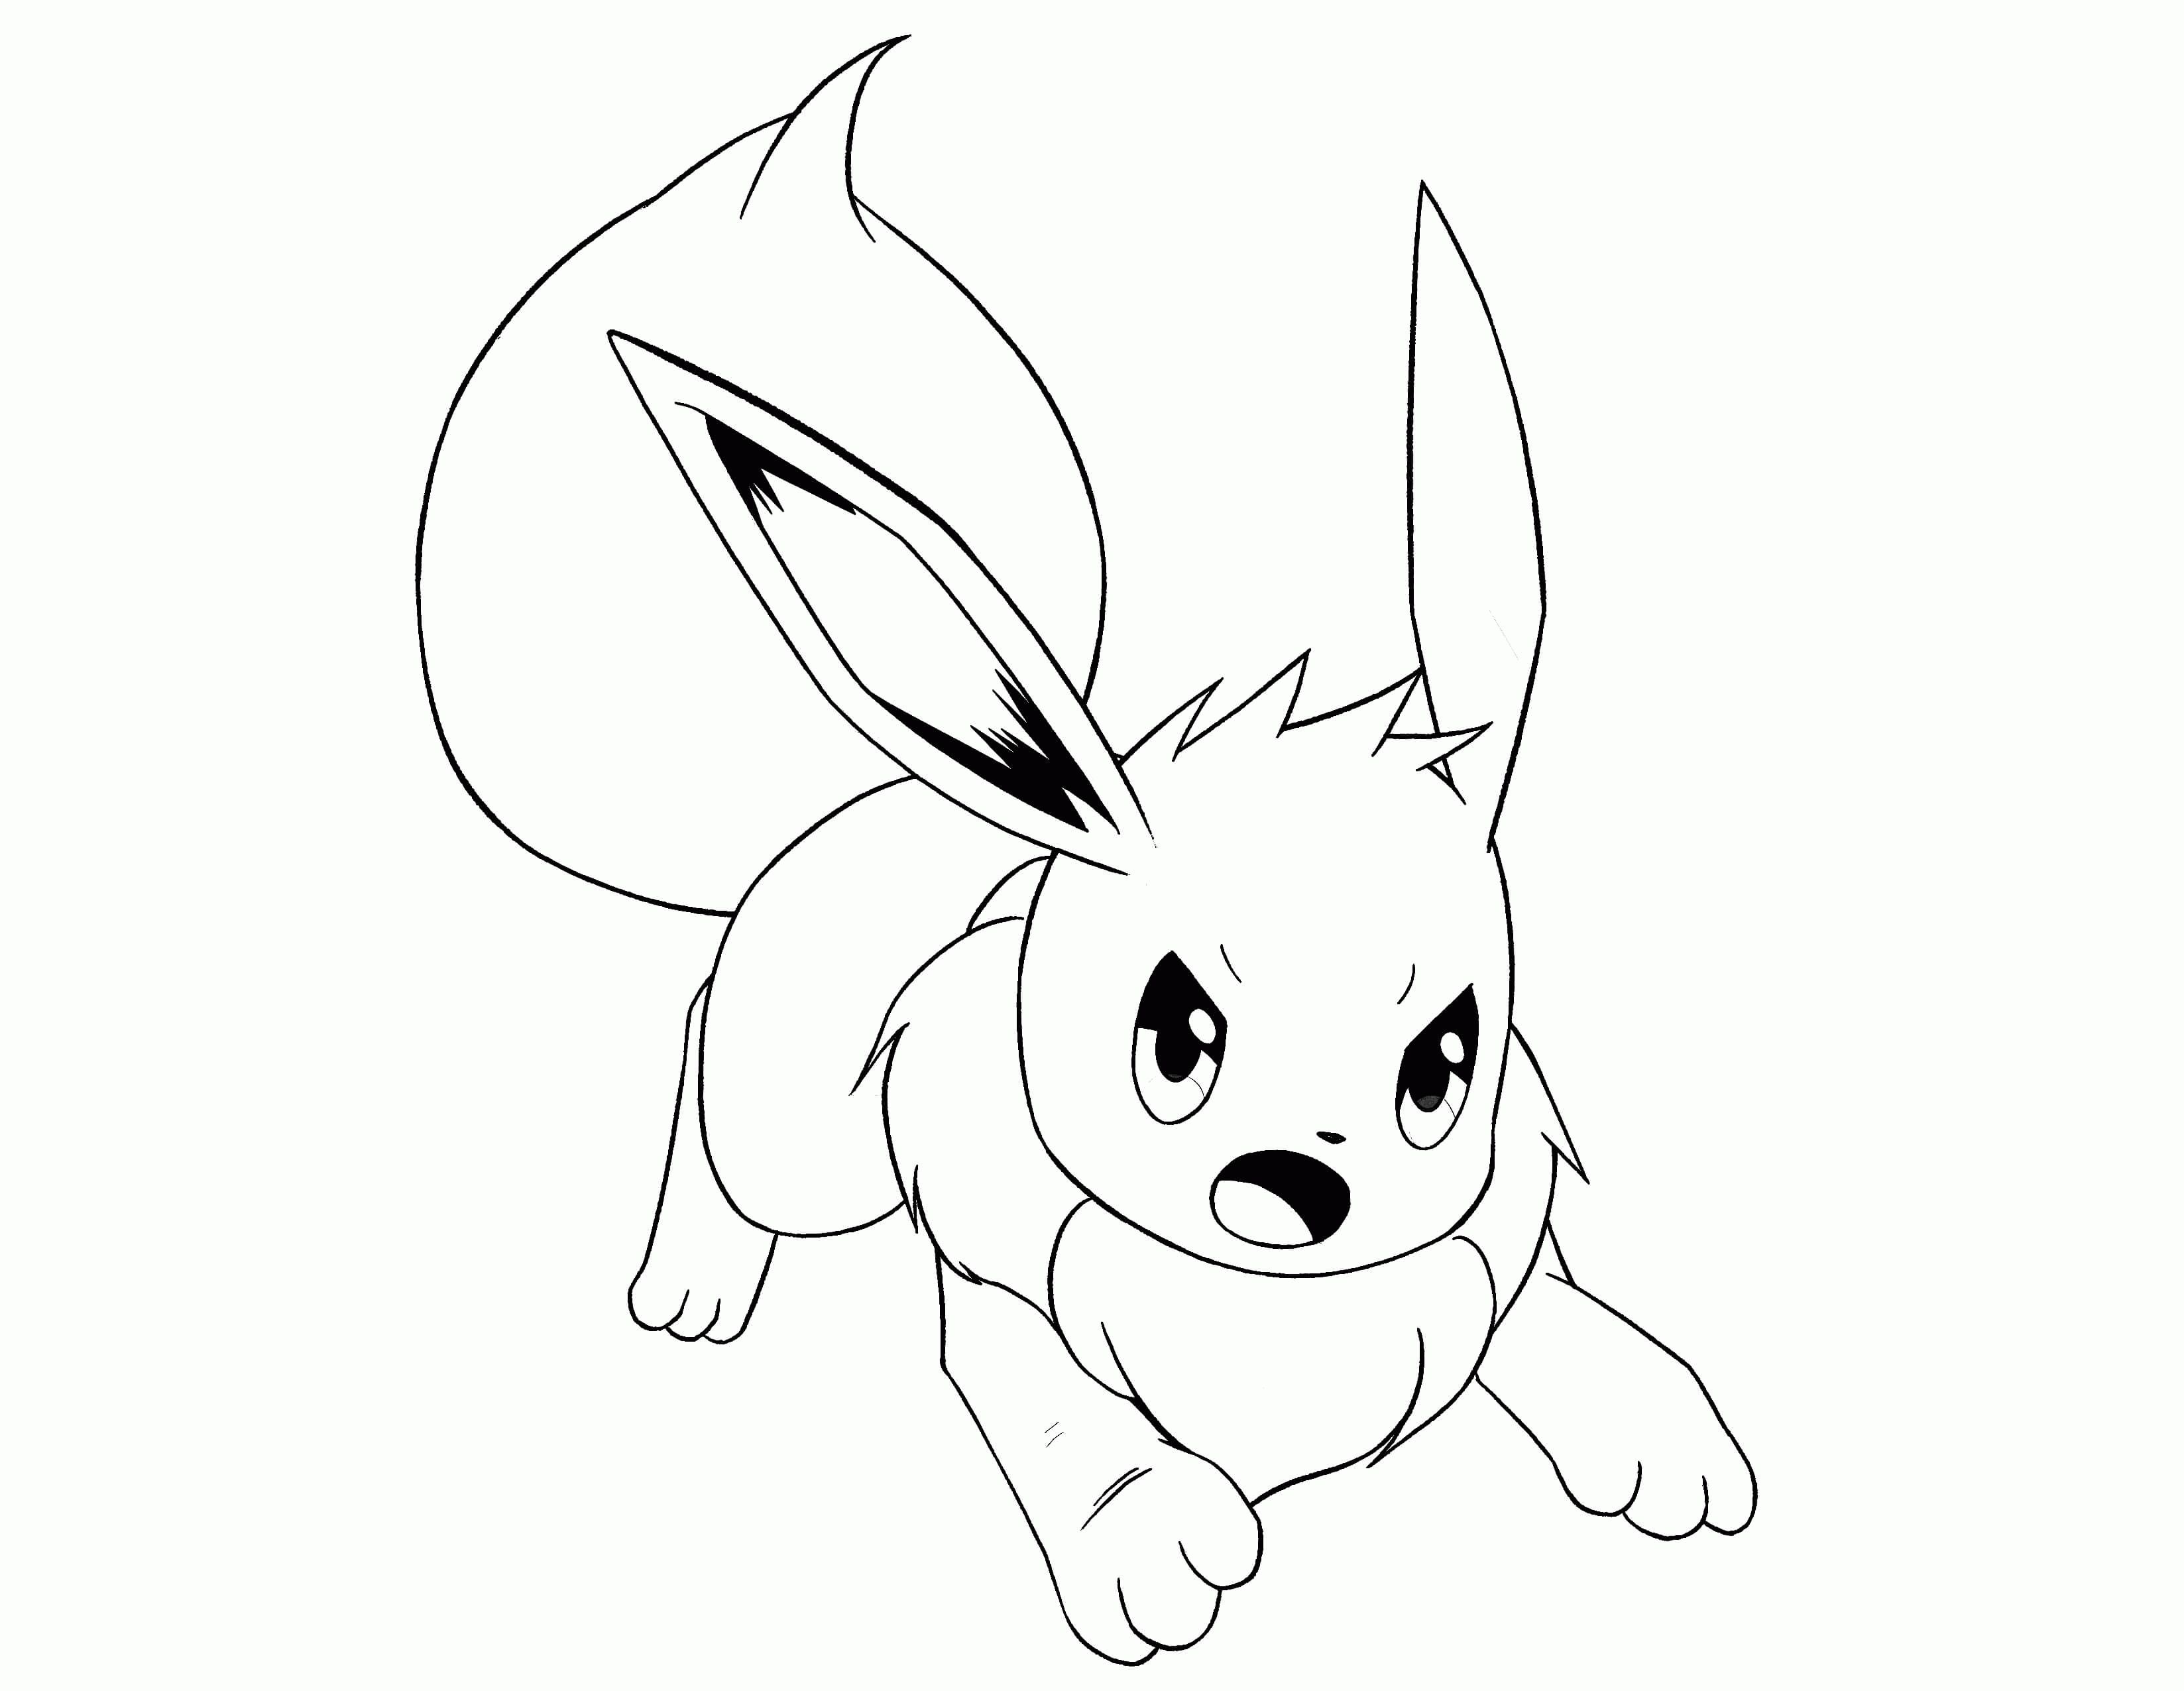 Printable Pokemon Coloring Pages Eevee Evolutions 3285 - Pokemon    Pokemon coloring pages, Pokemon coloring, Coloring pages inspirational